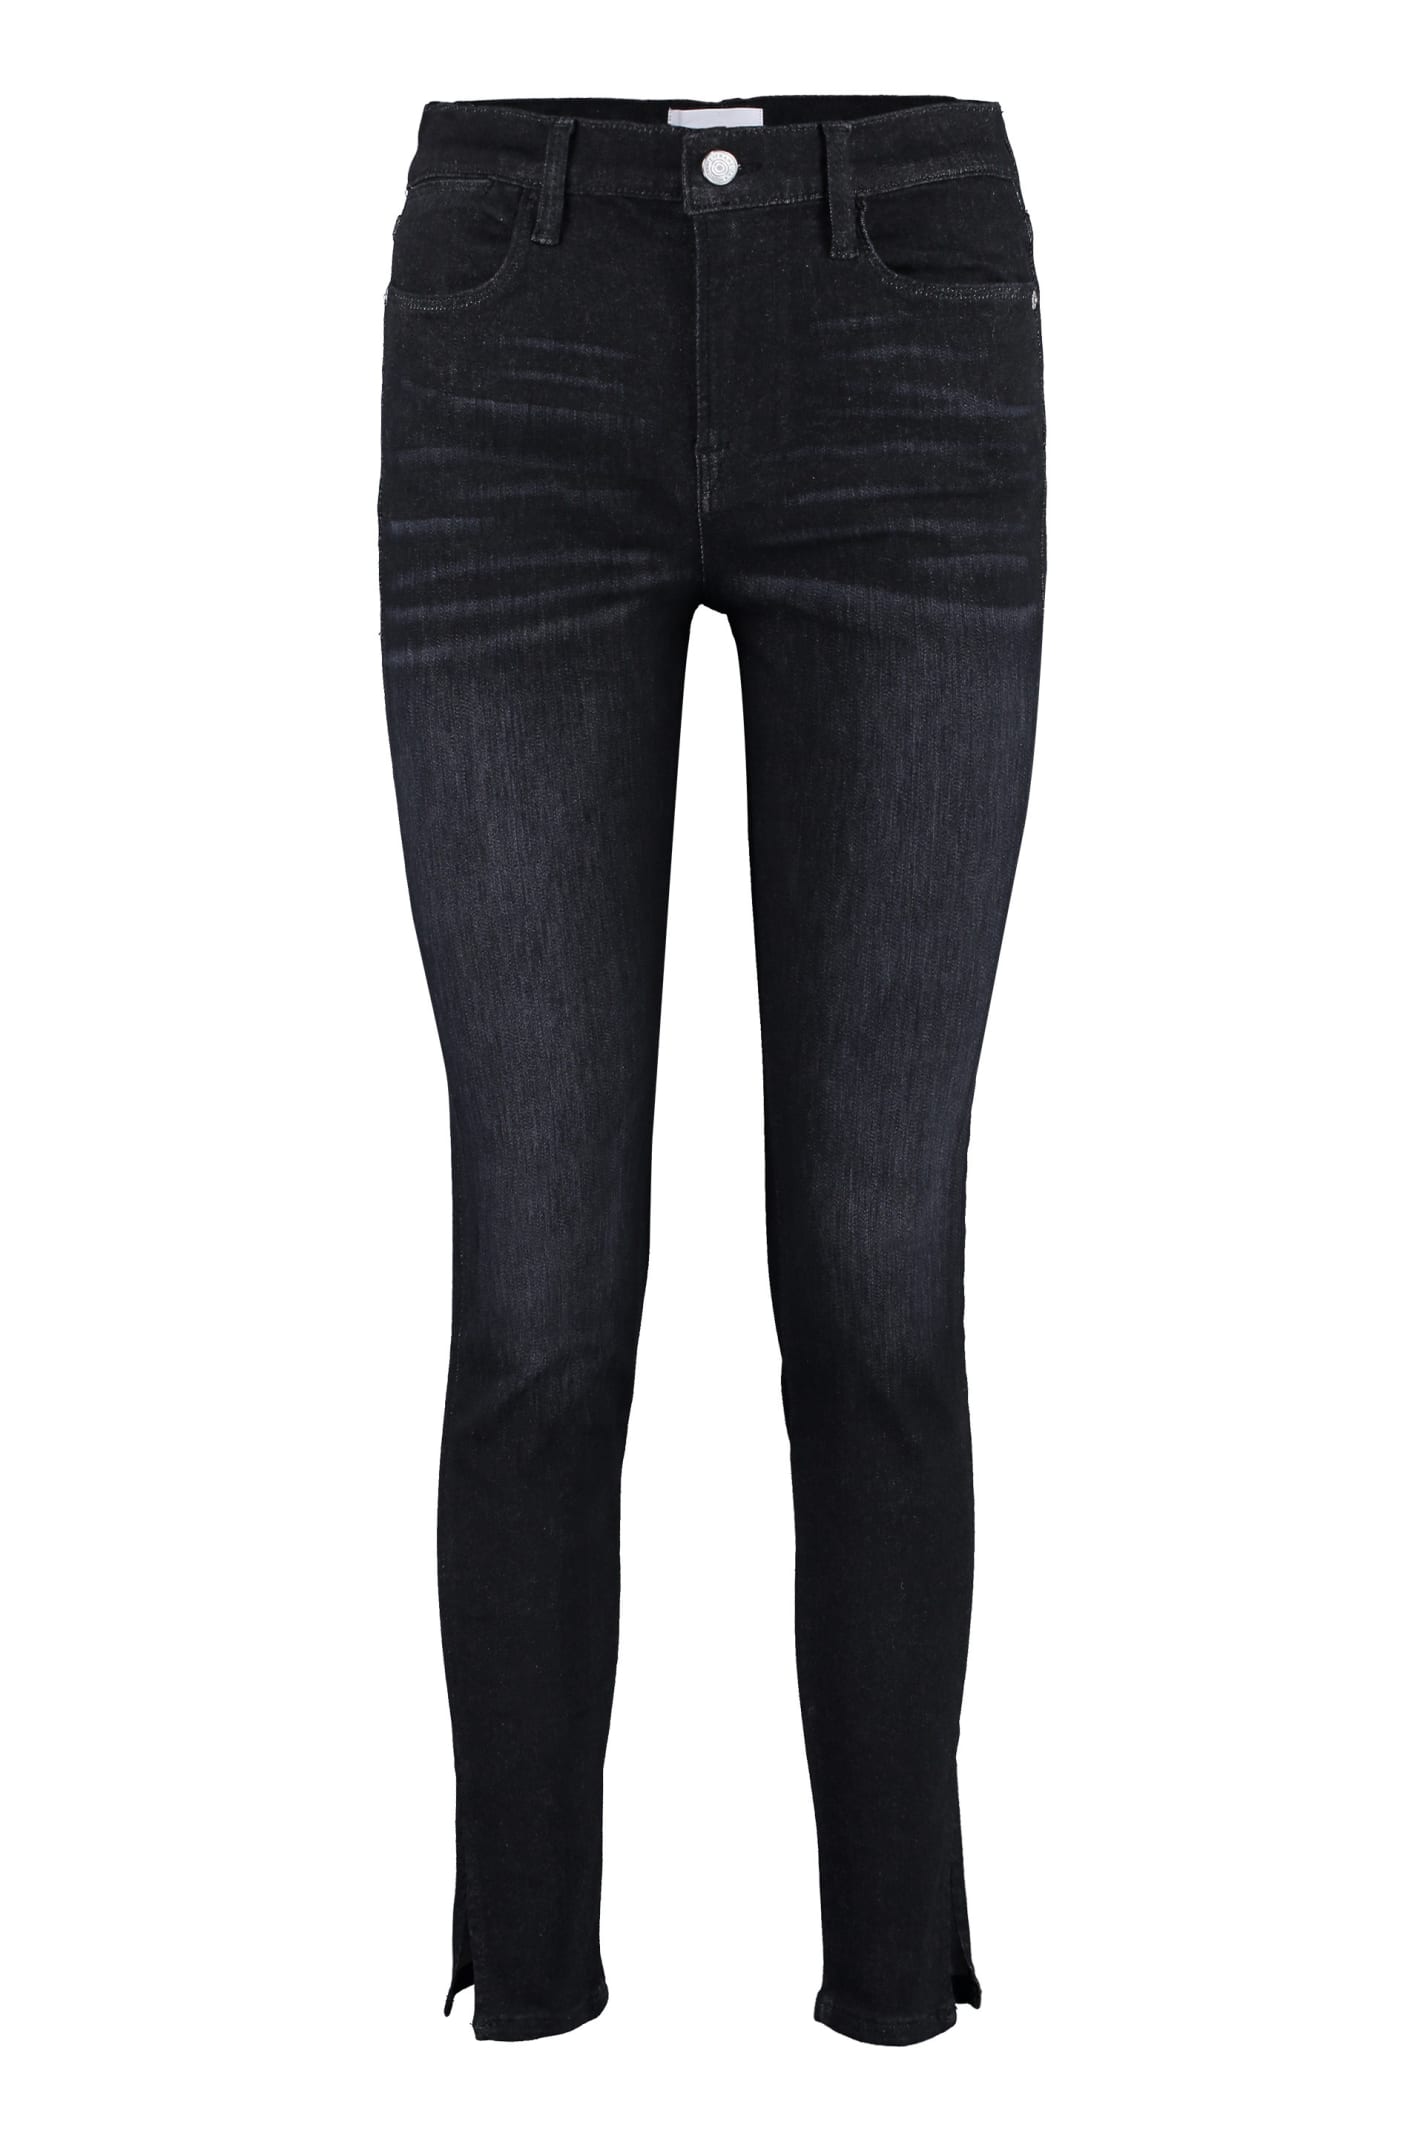 FRAME LE SHAPE HIGH-RISE SKINNY-FIT JEANS